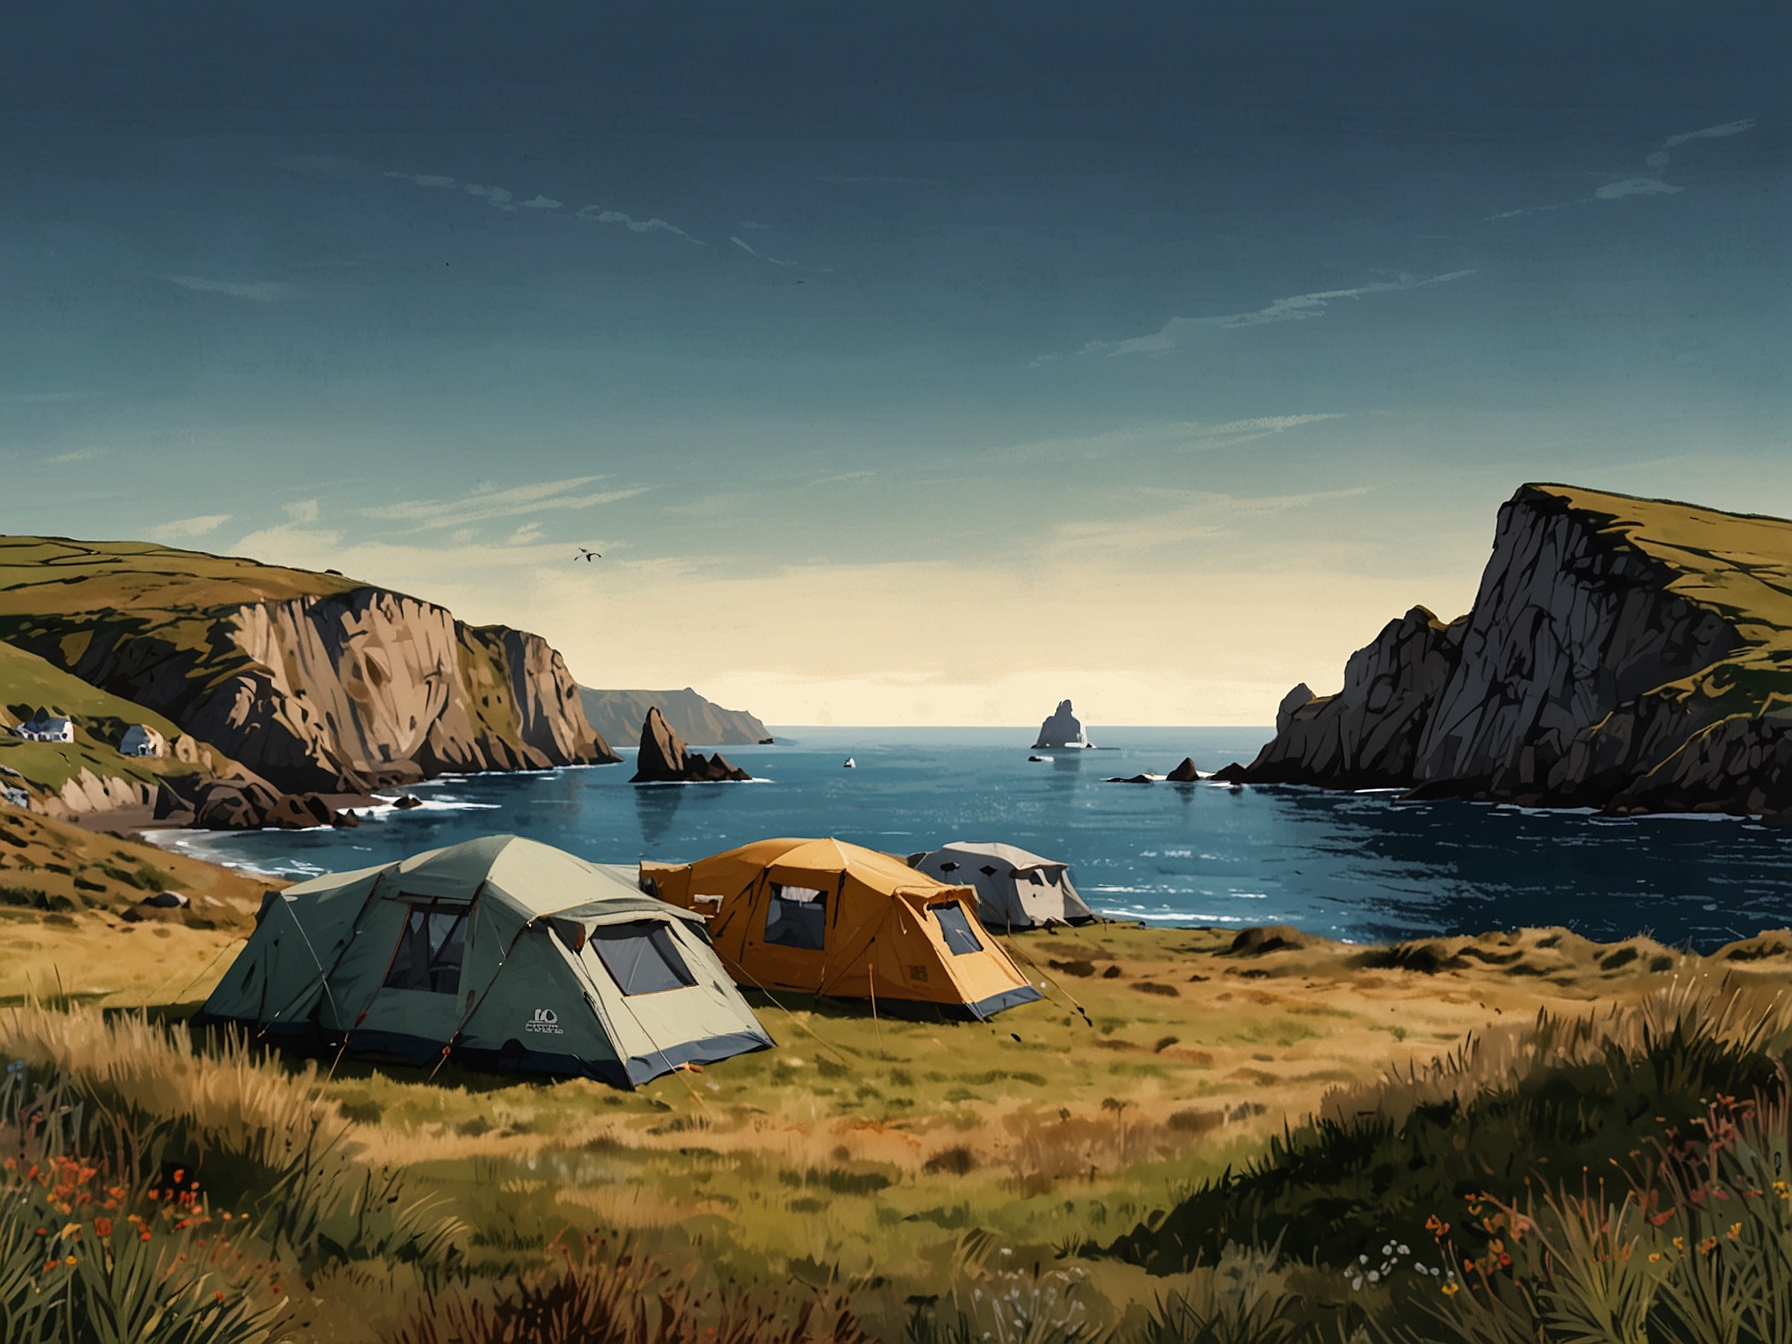 A stunning coastal campsite in Cornwall featuring tents near golden sands with the dramatic cliffs of Land's End in the background, highlighting the diverse scenery campers can enjoy.